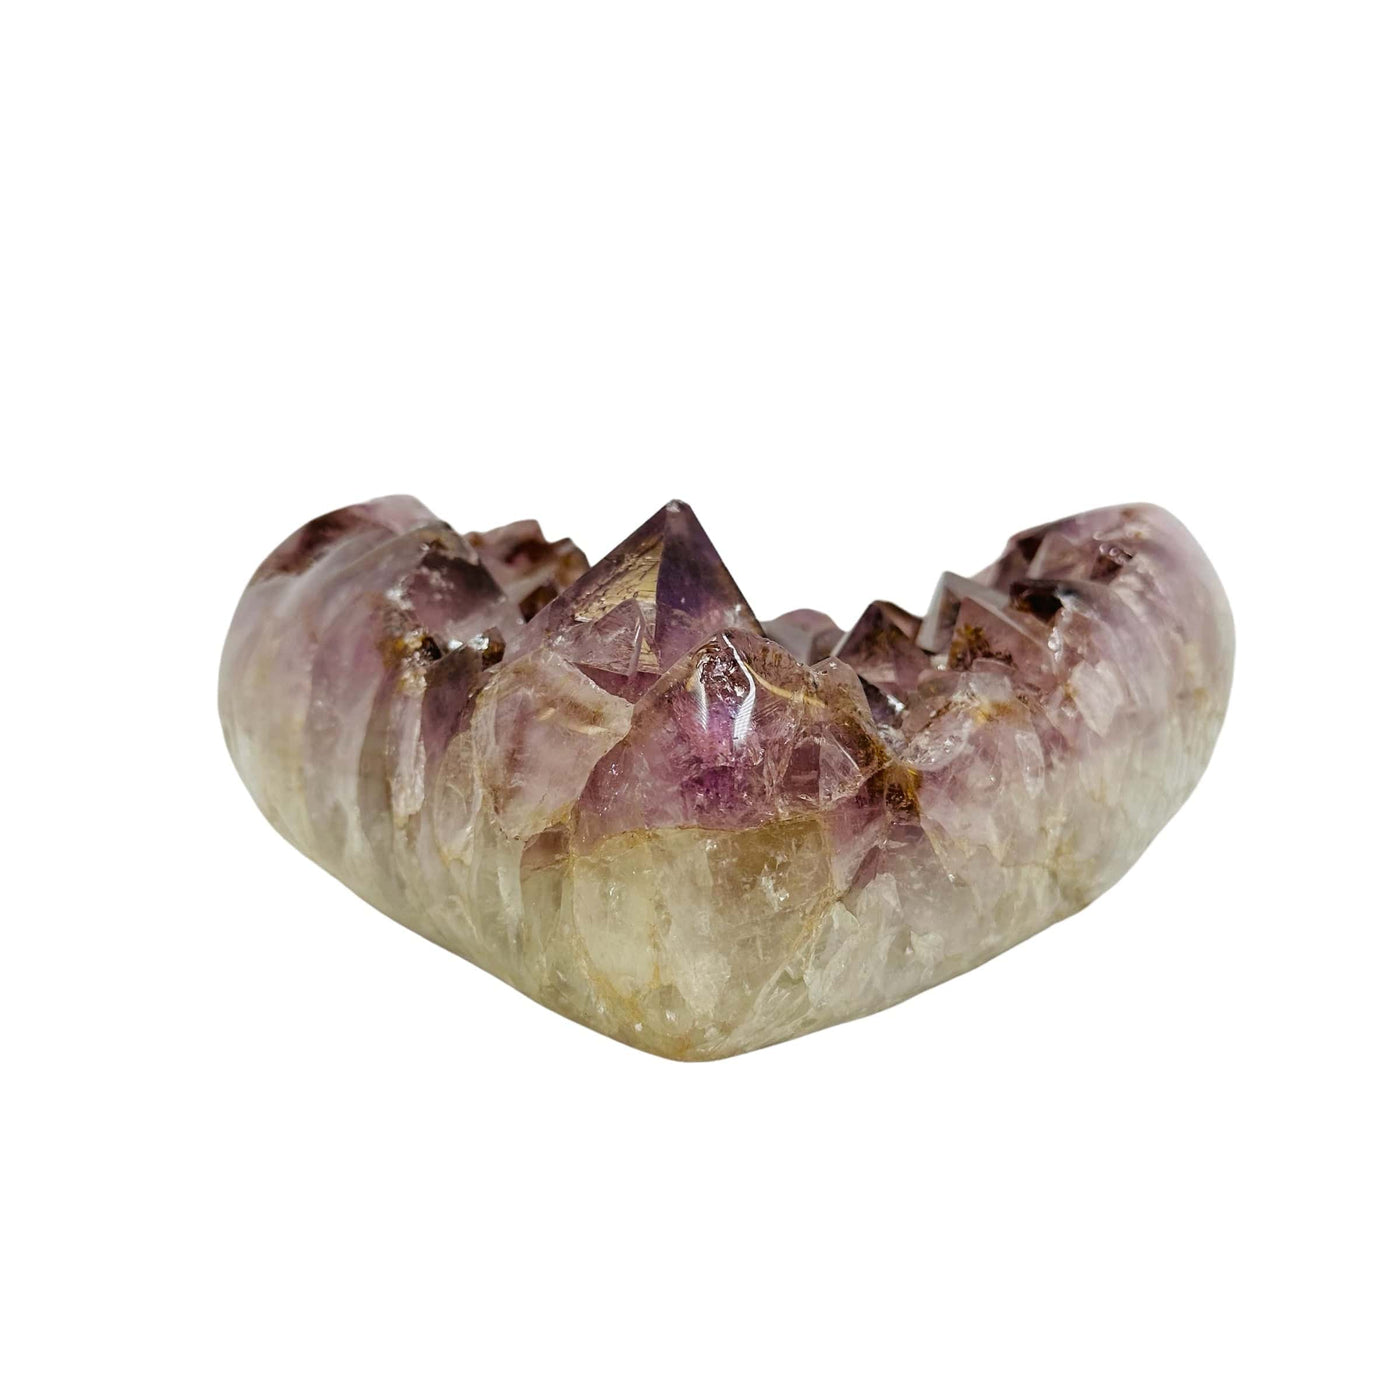 side view to show a large amethyst cluster sticking out of the heart 